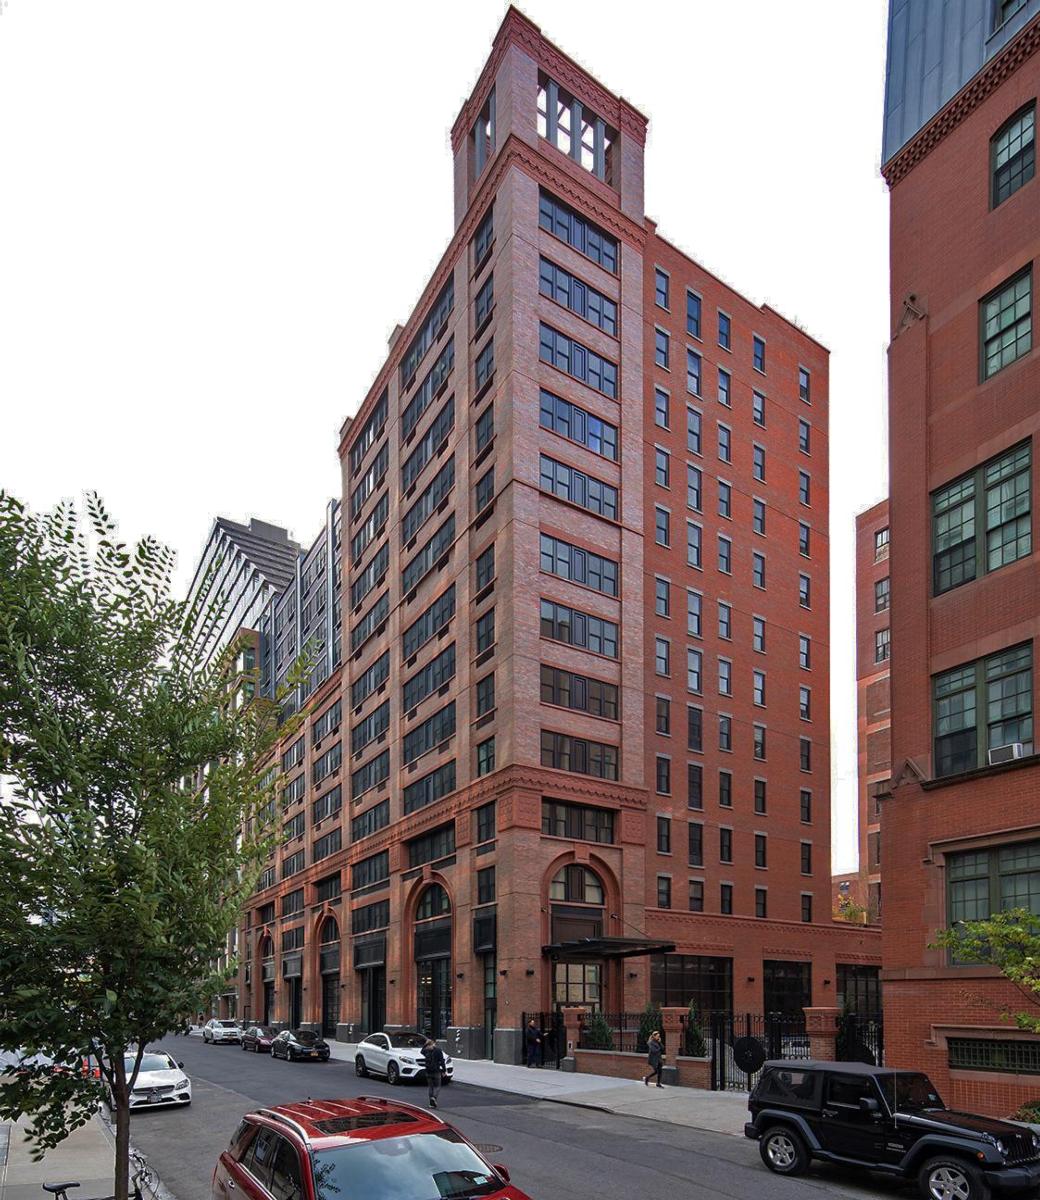 The red bricked exterior of the windowed and tall 540 West 53rd Street building